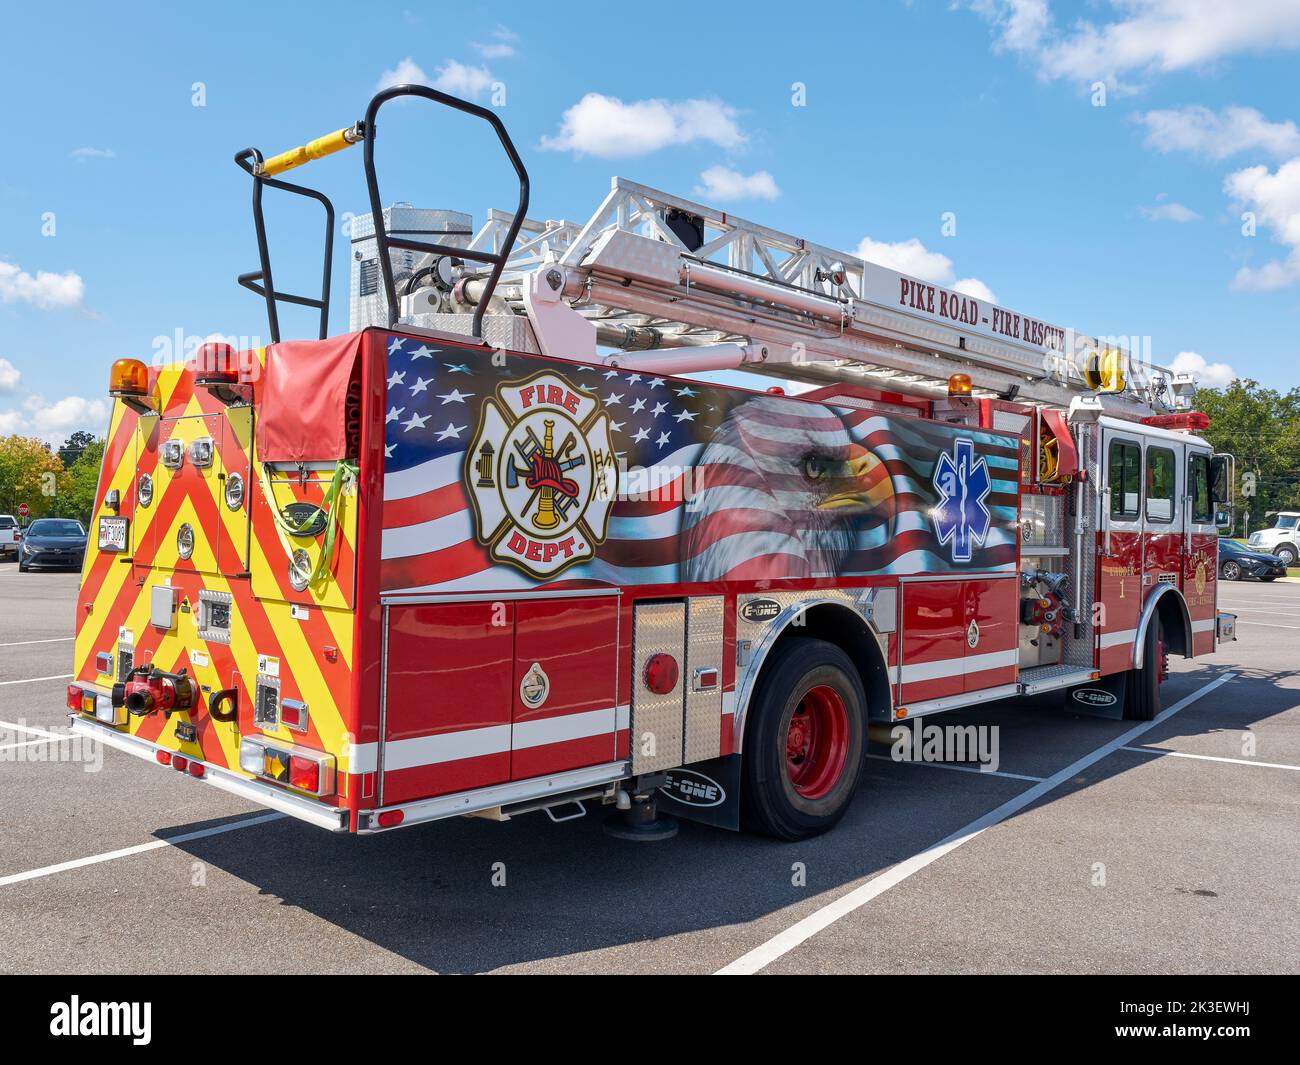 Large volunteer red ladder truck or fire truck used as an emergency vehicle and rescue vehicle for a local fire department in Pike Road Alabama, USA. Stock Photo